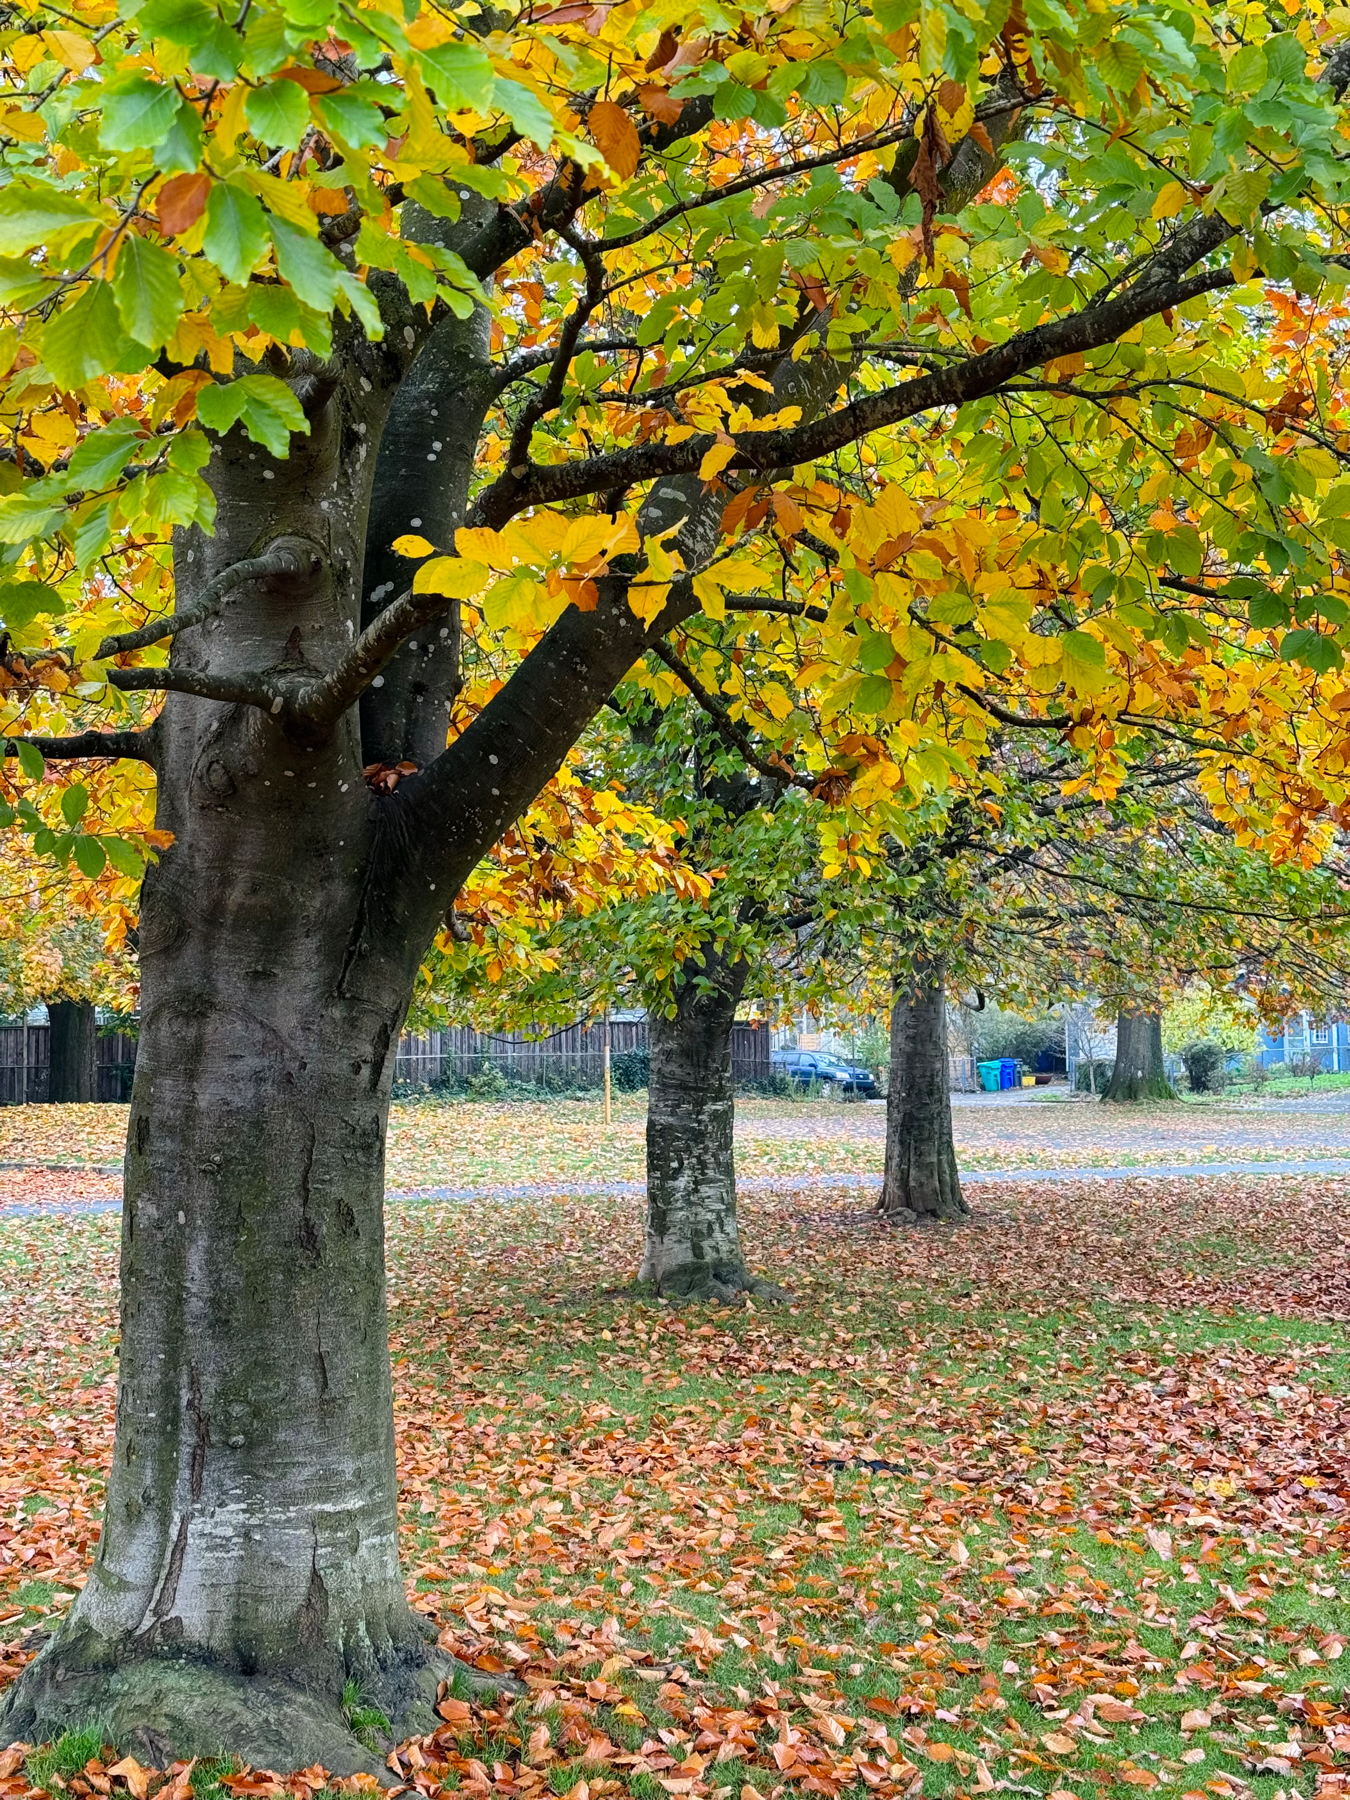 Three trees in a row with yellow green leaves on them and dry dark yellow leaves on the grass below.